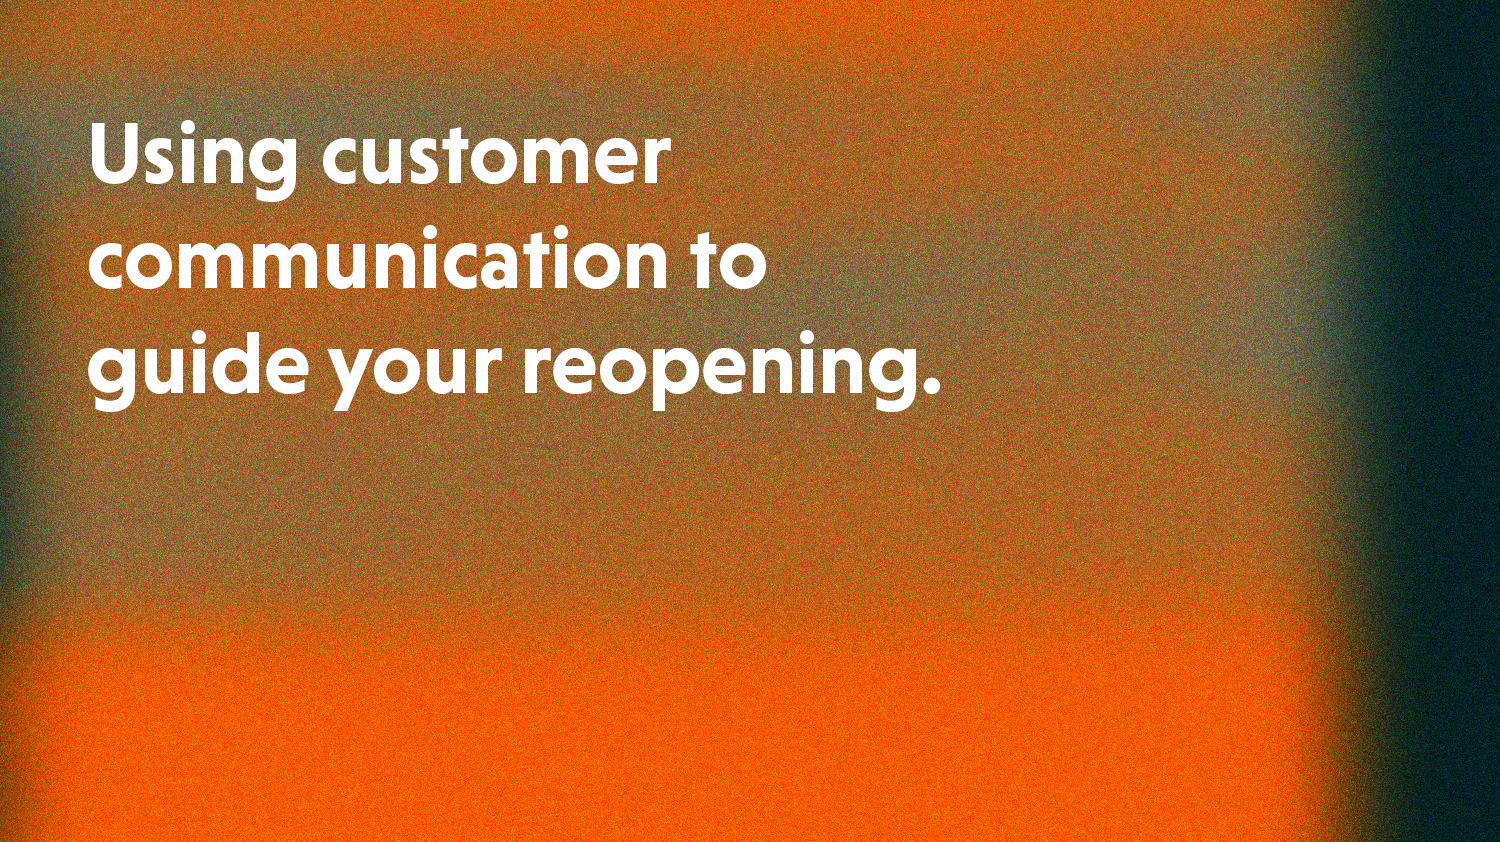 Using Customer Communication to Guide Your Reopening